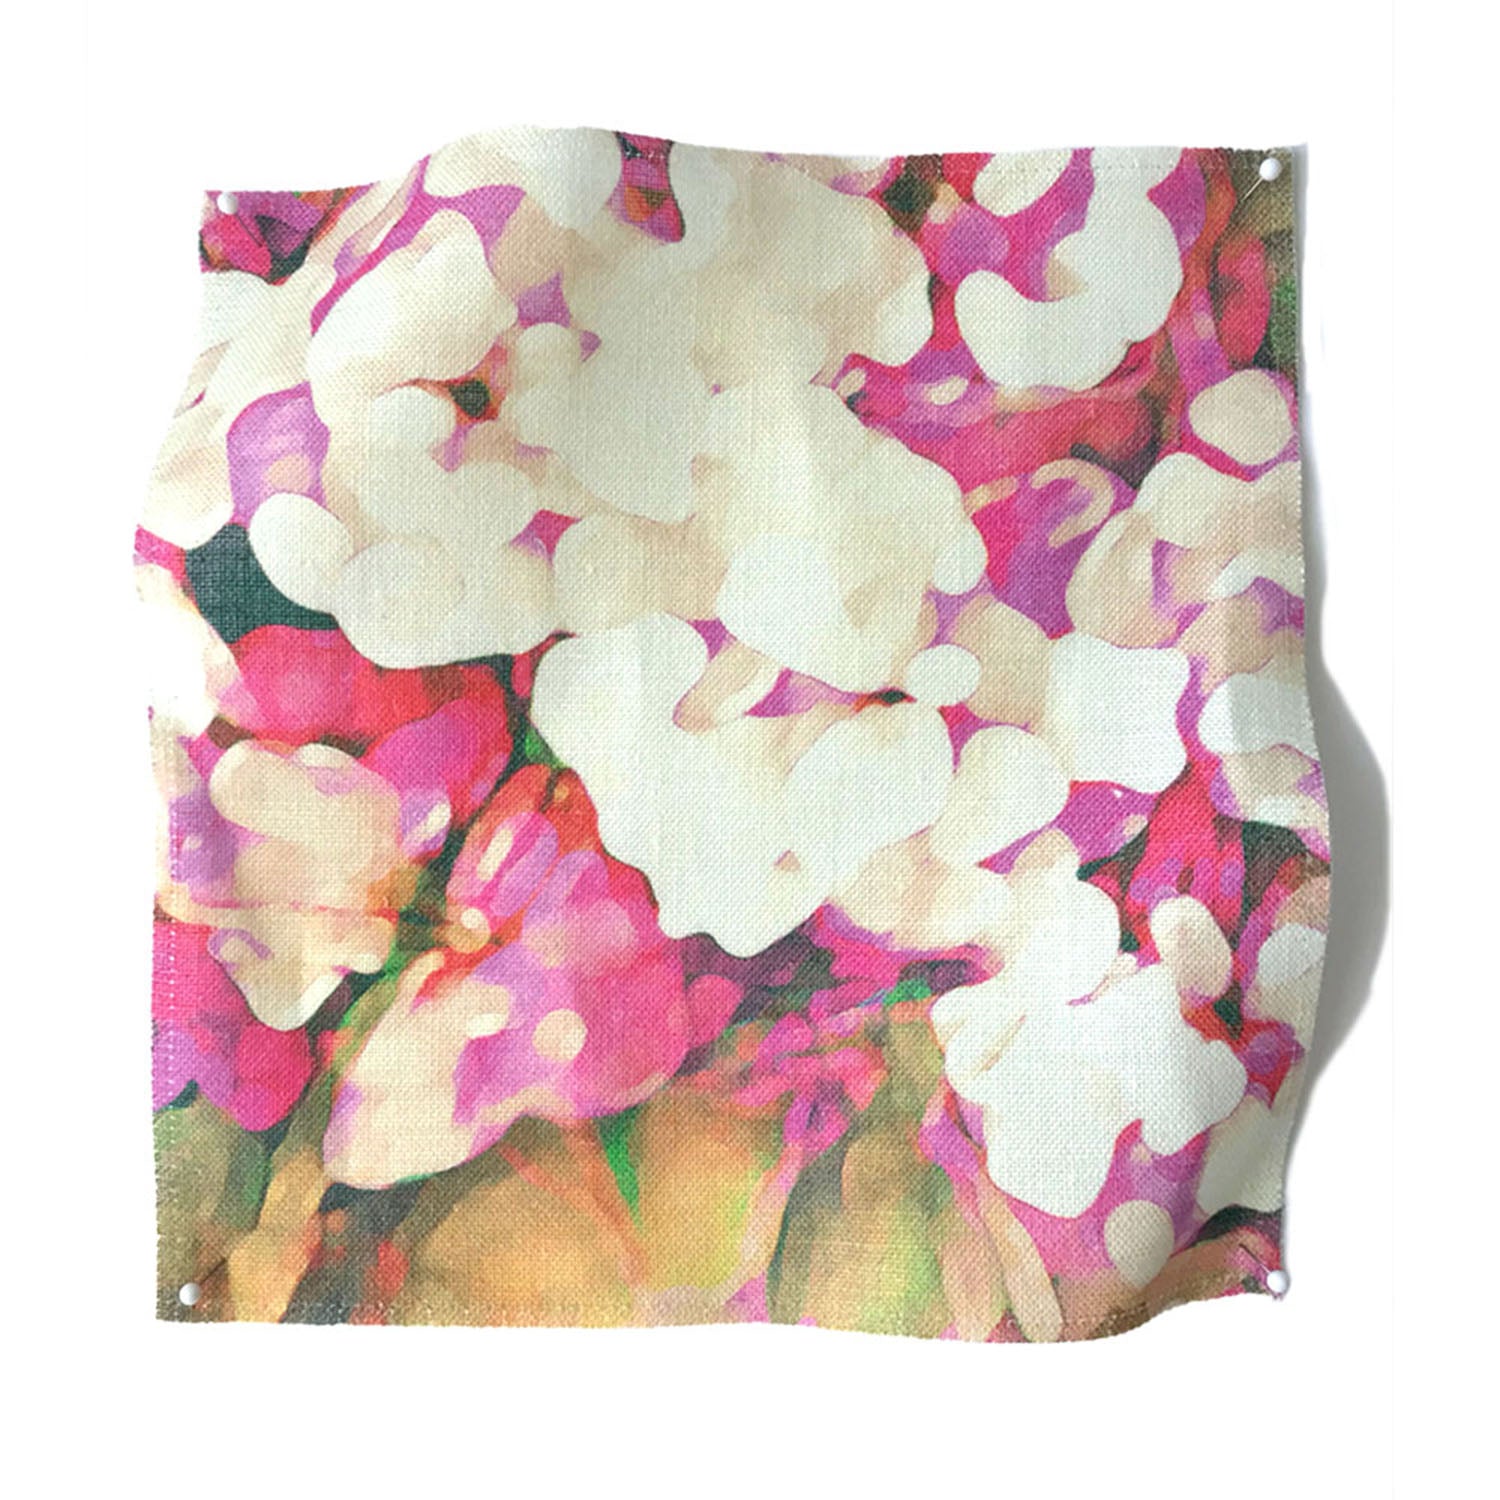 Square fabric swatch in an abstract floral print in technicolor shades of pink, cream and green.